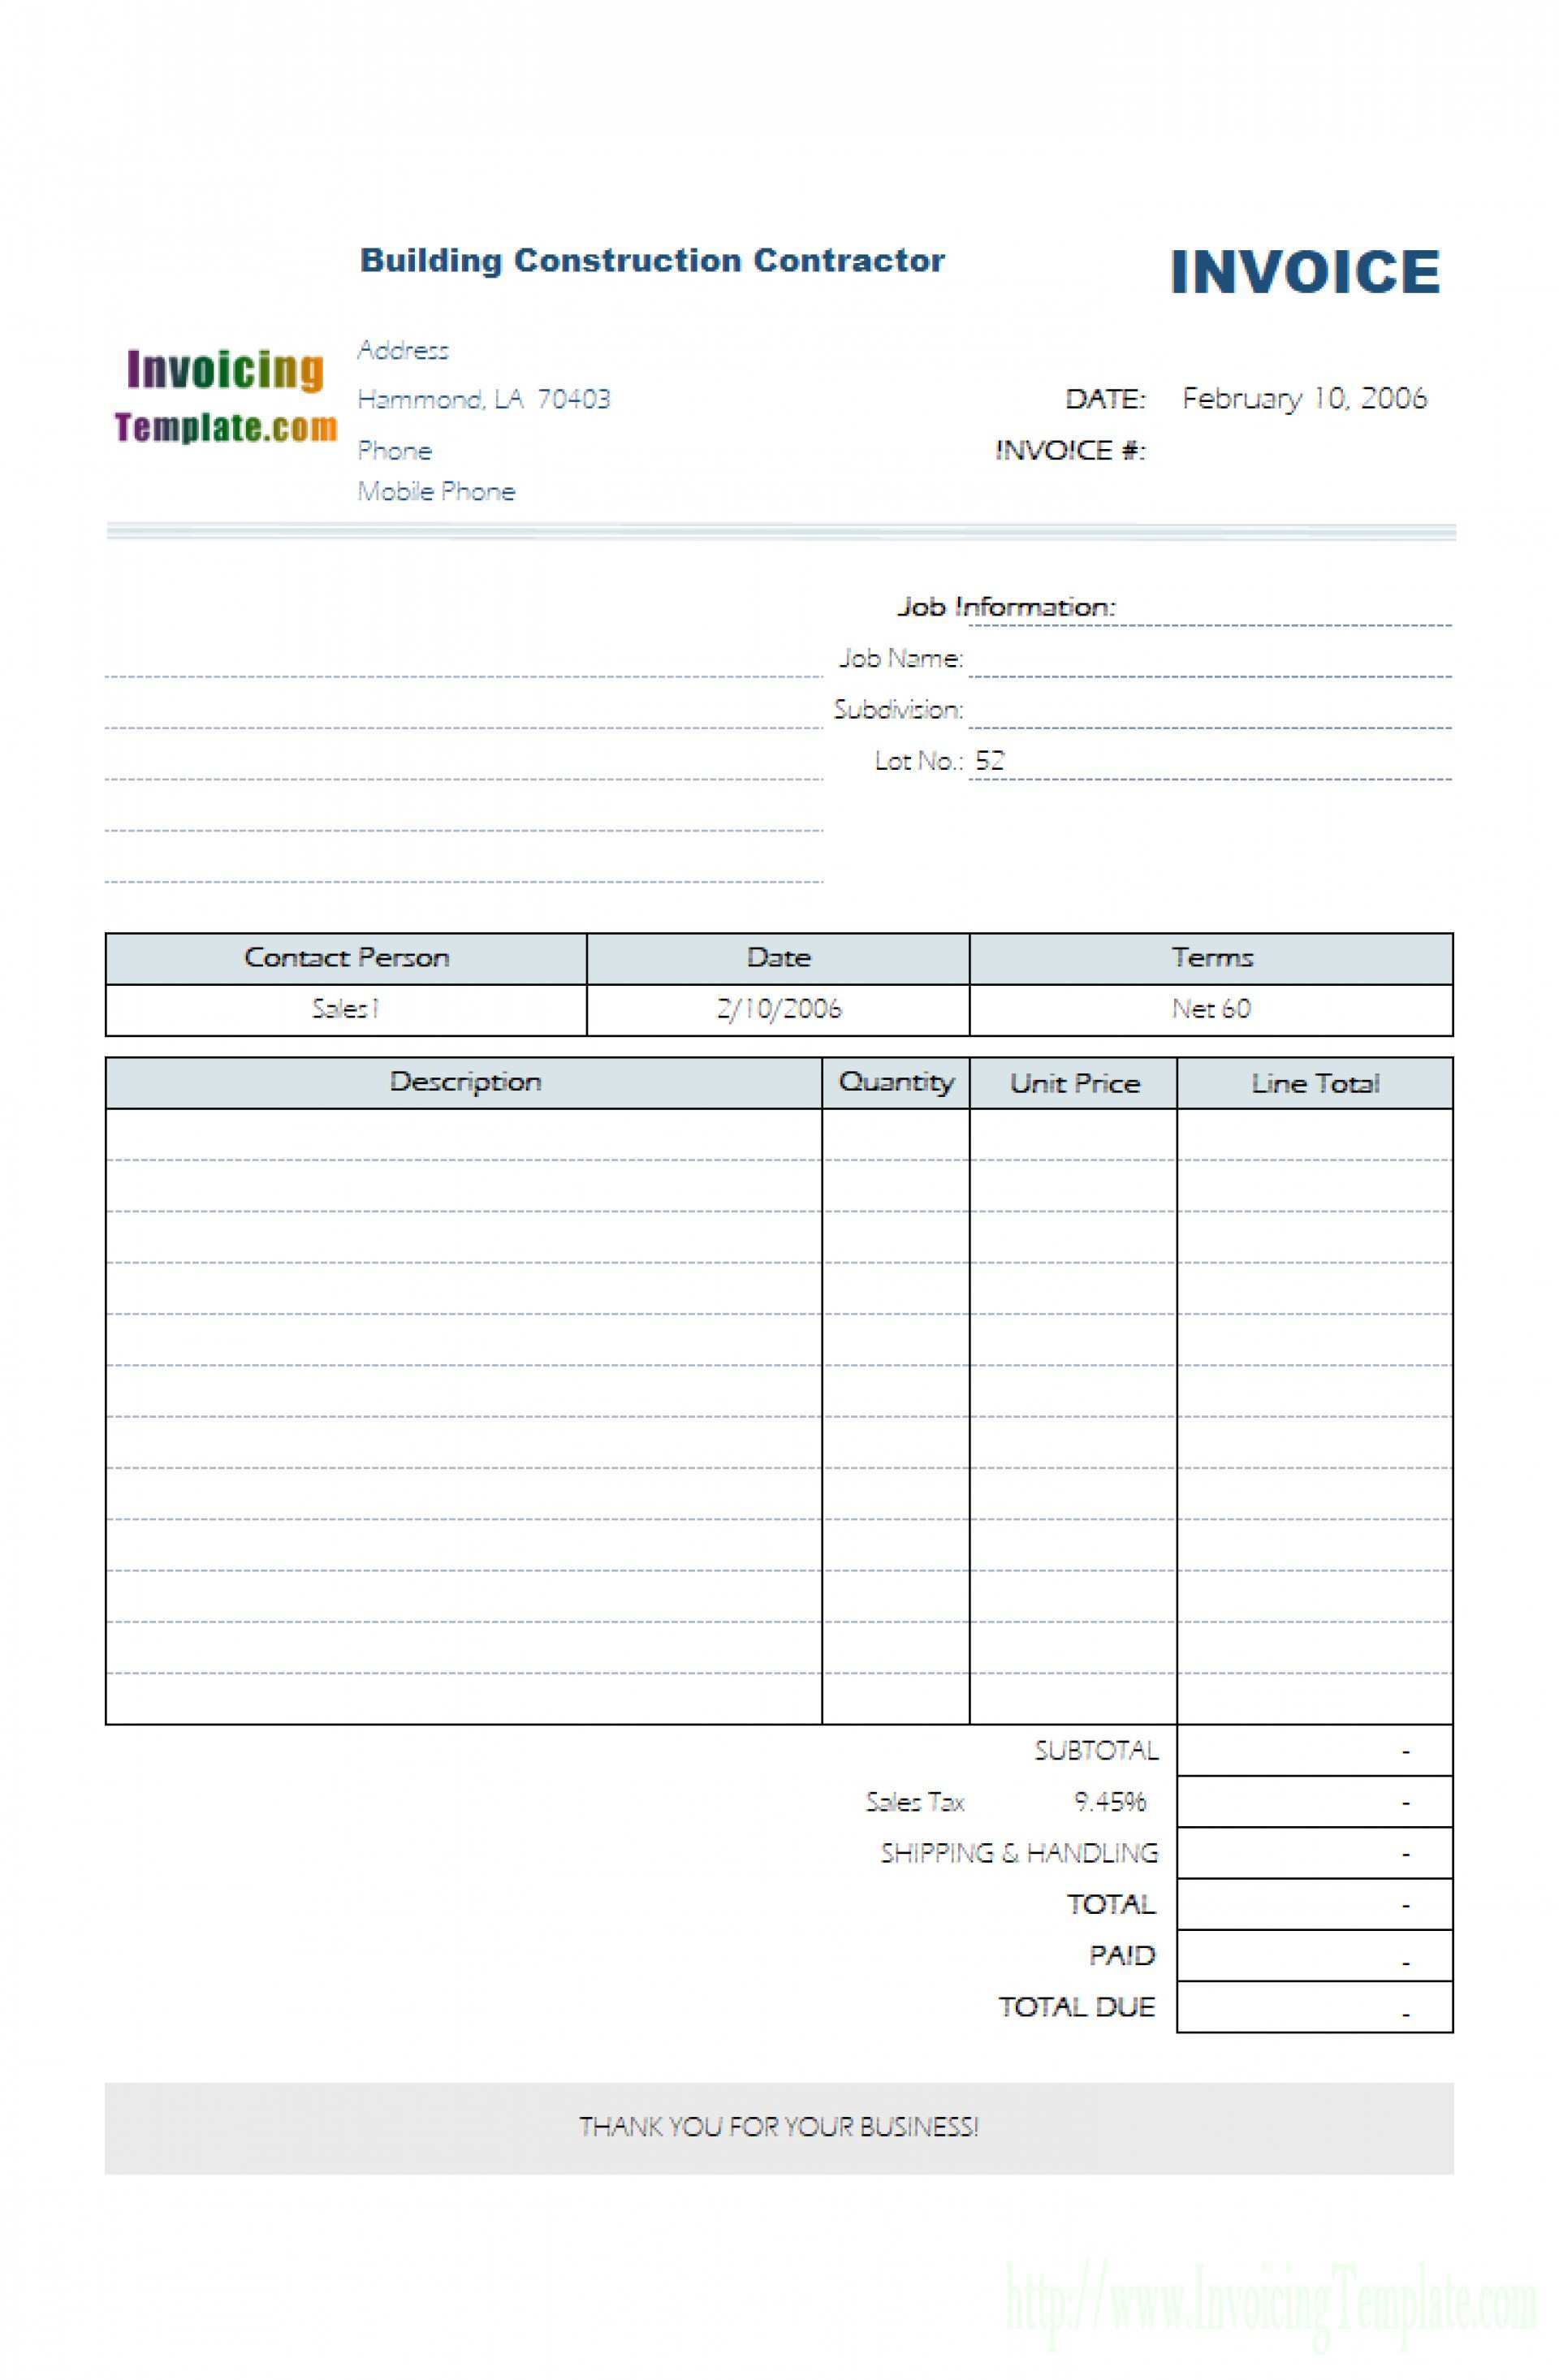 self-employed-construction-invoice-template-cards-design-templates